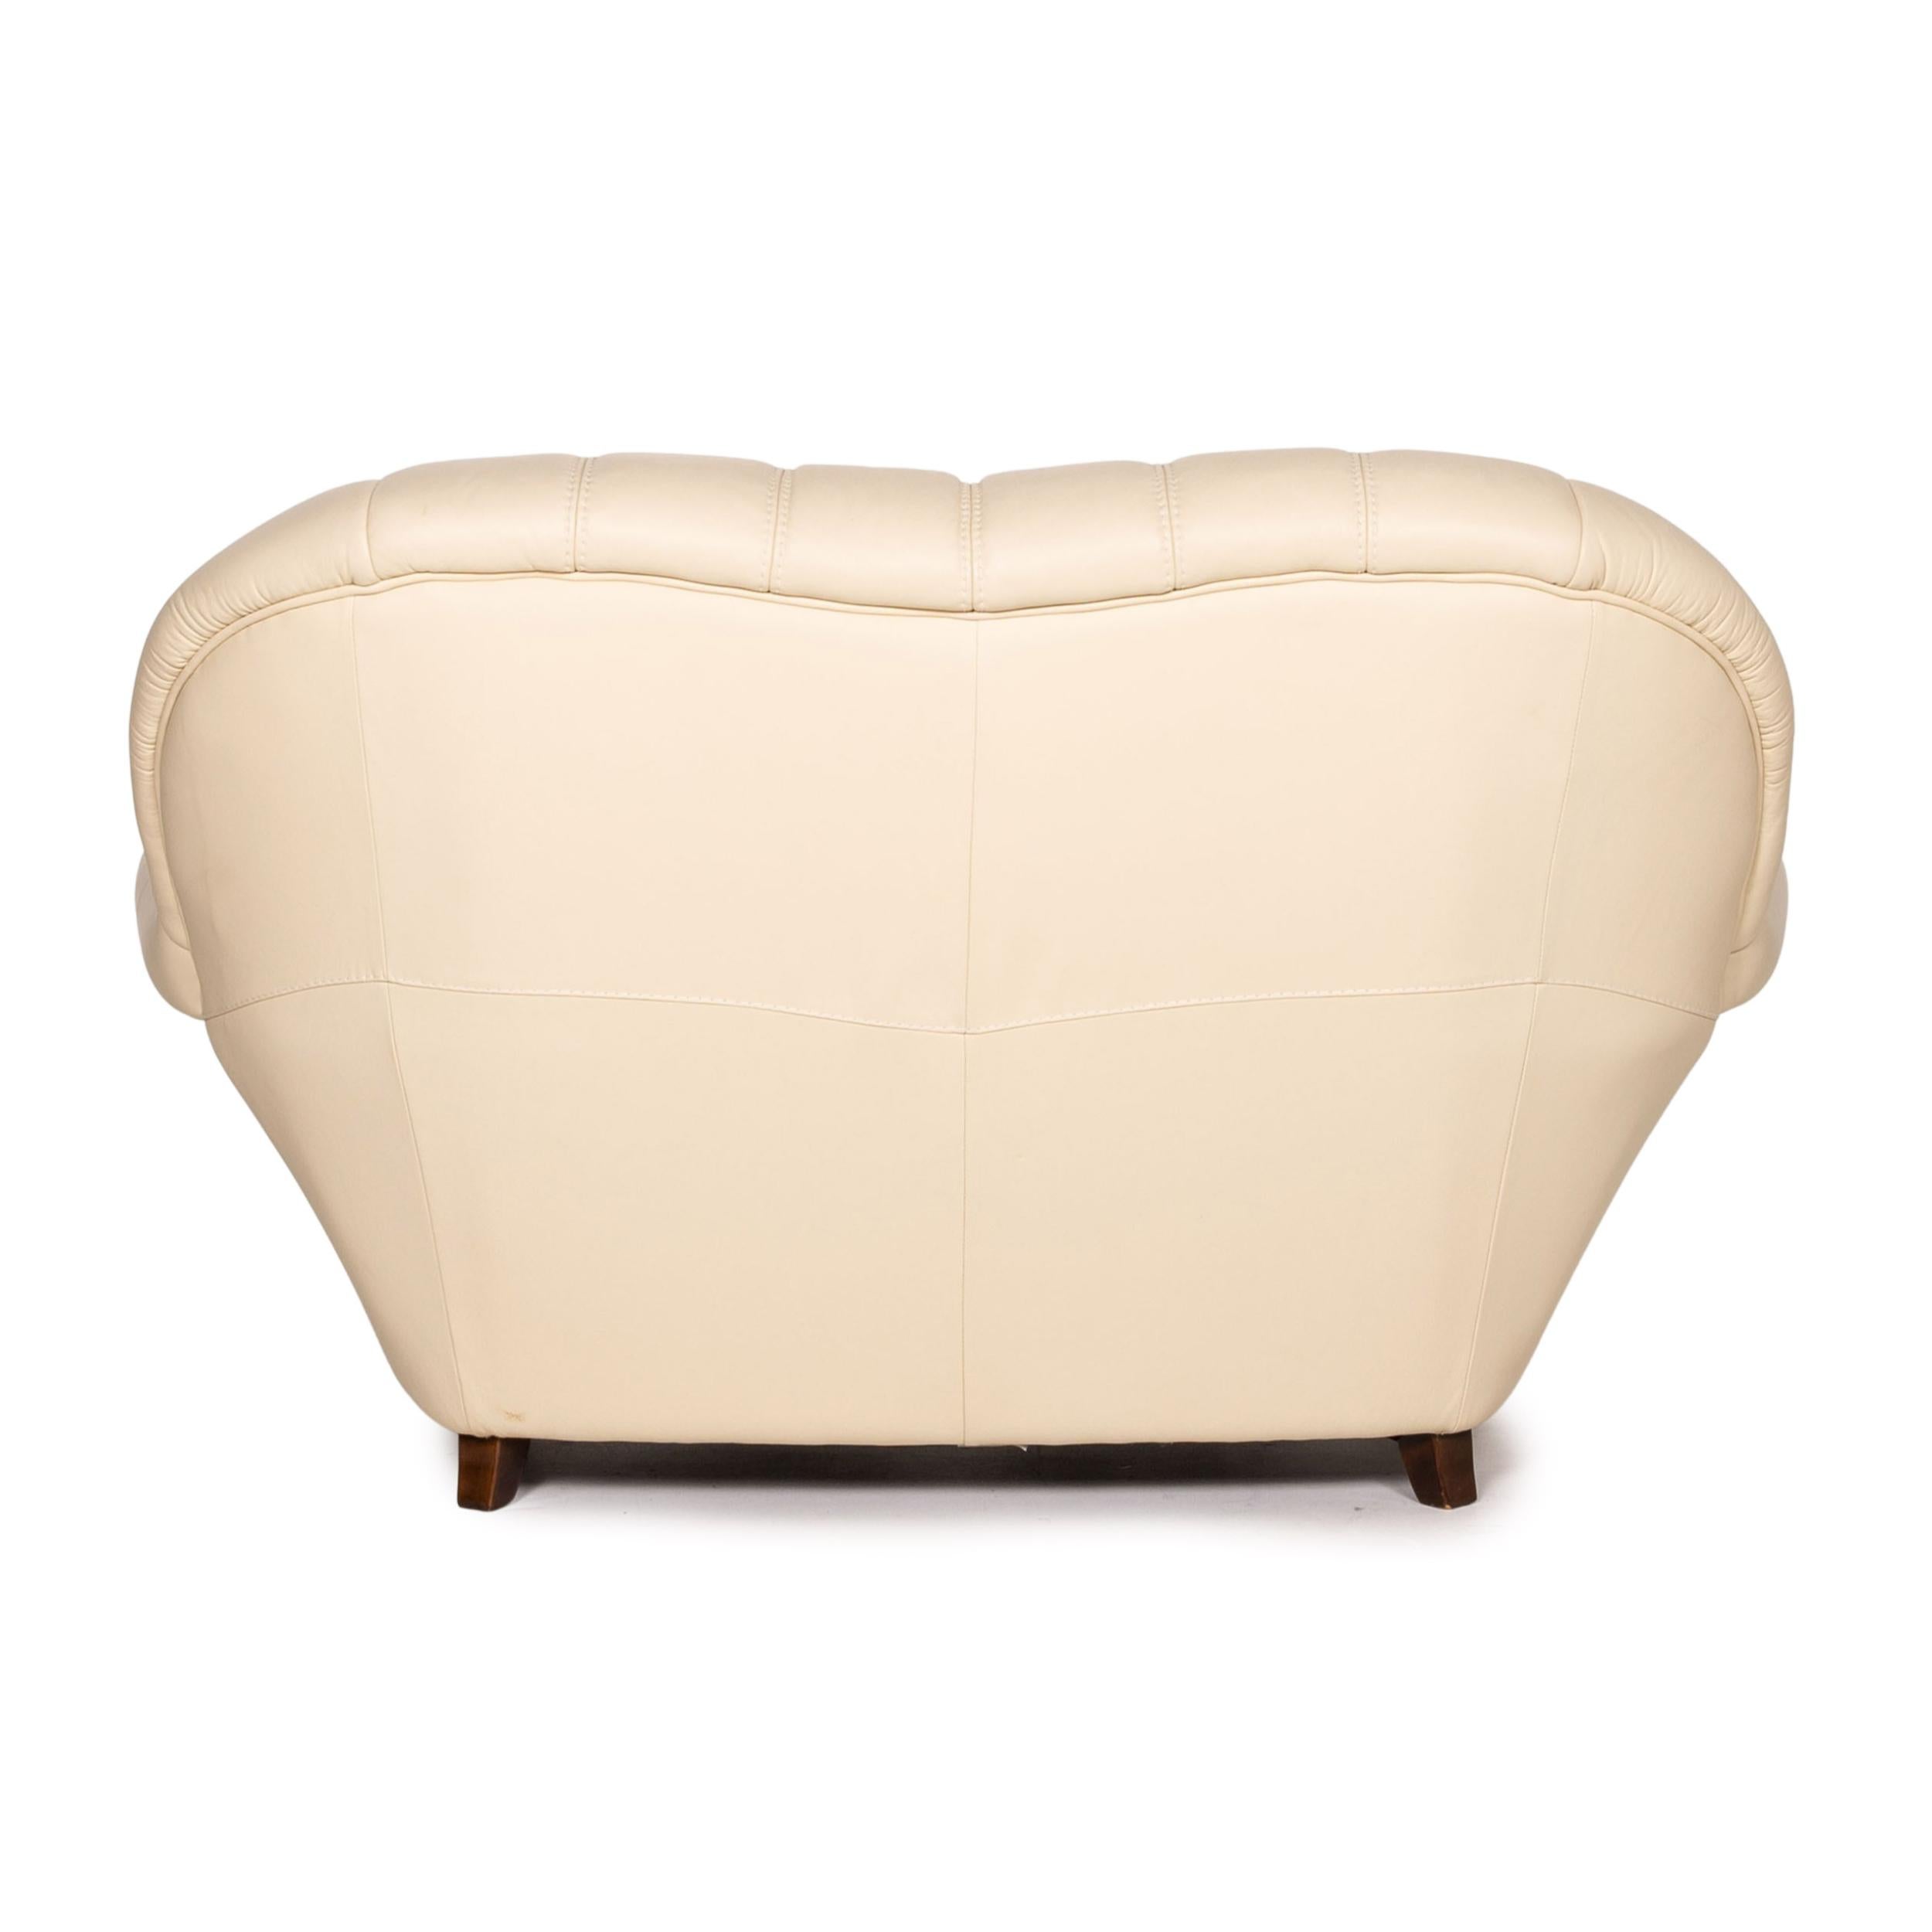 Nieri Leather Wood Sofa Cream Two-Seater Couch For Sale 3